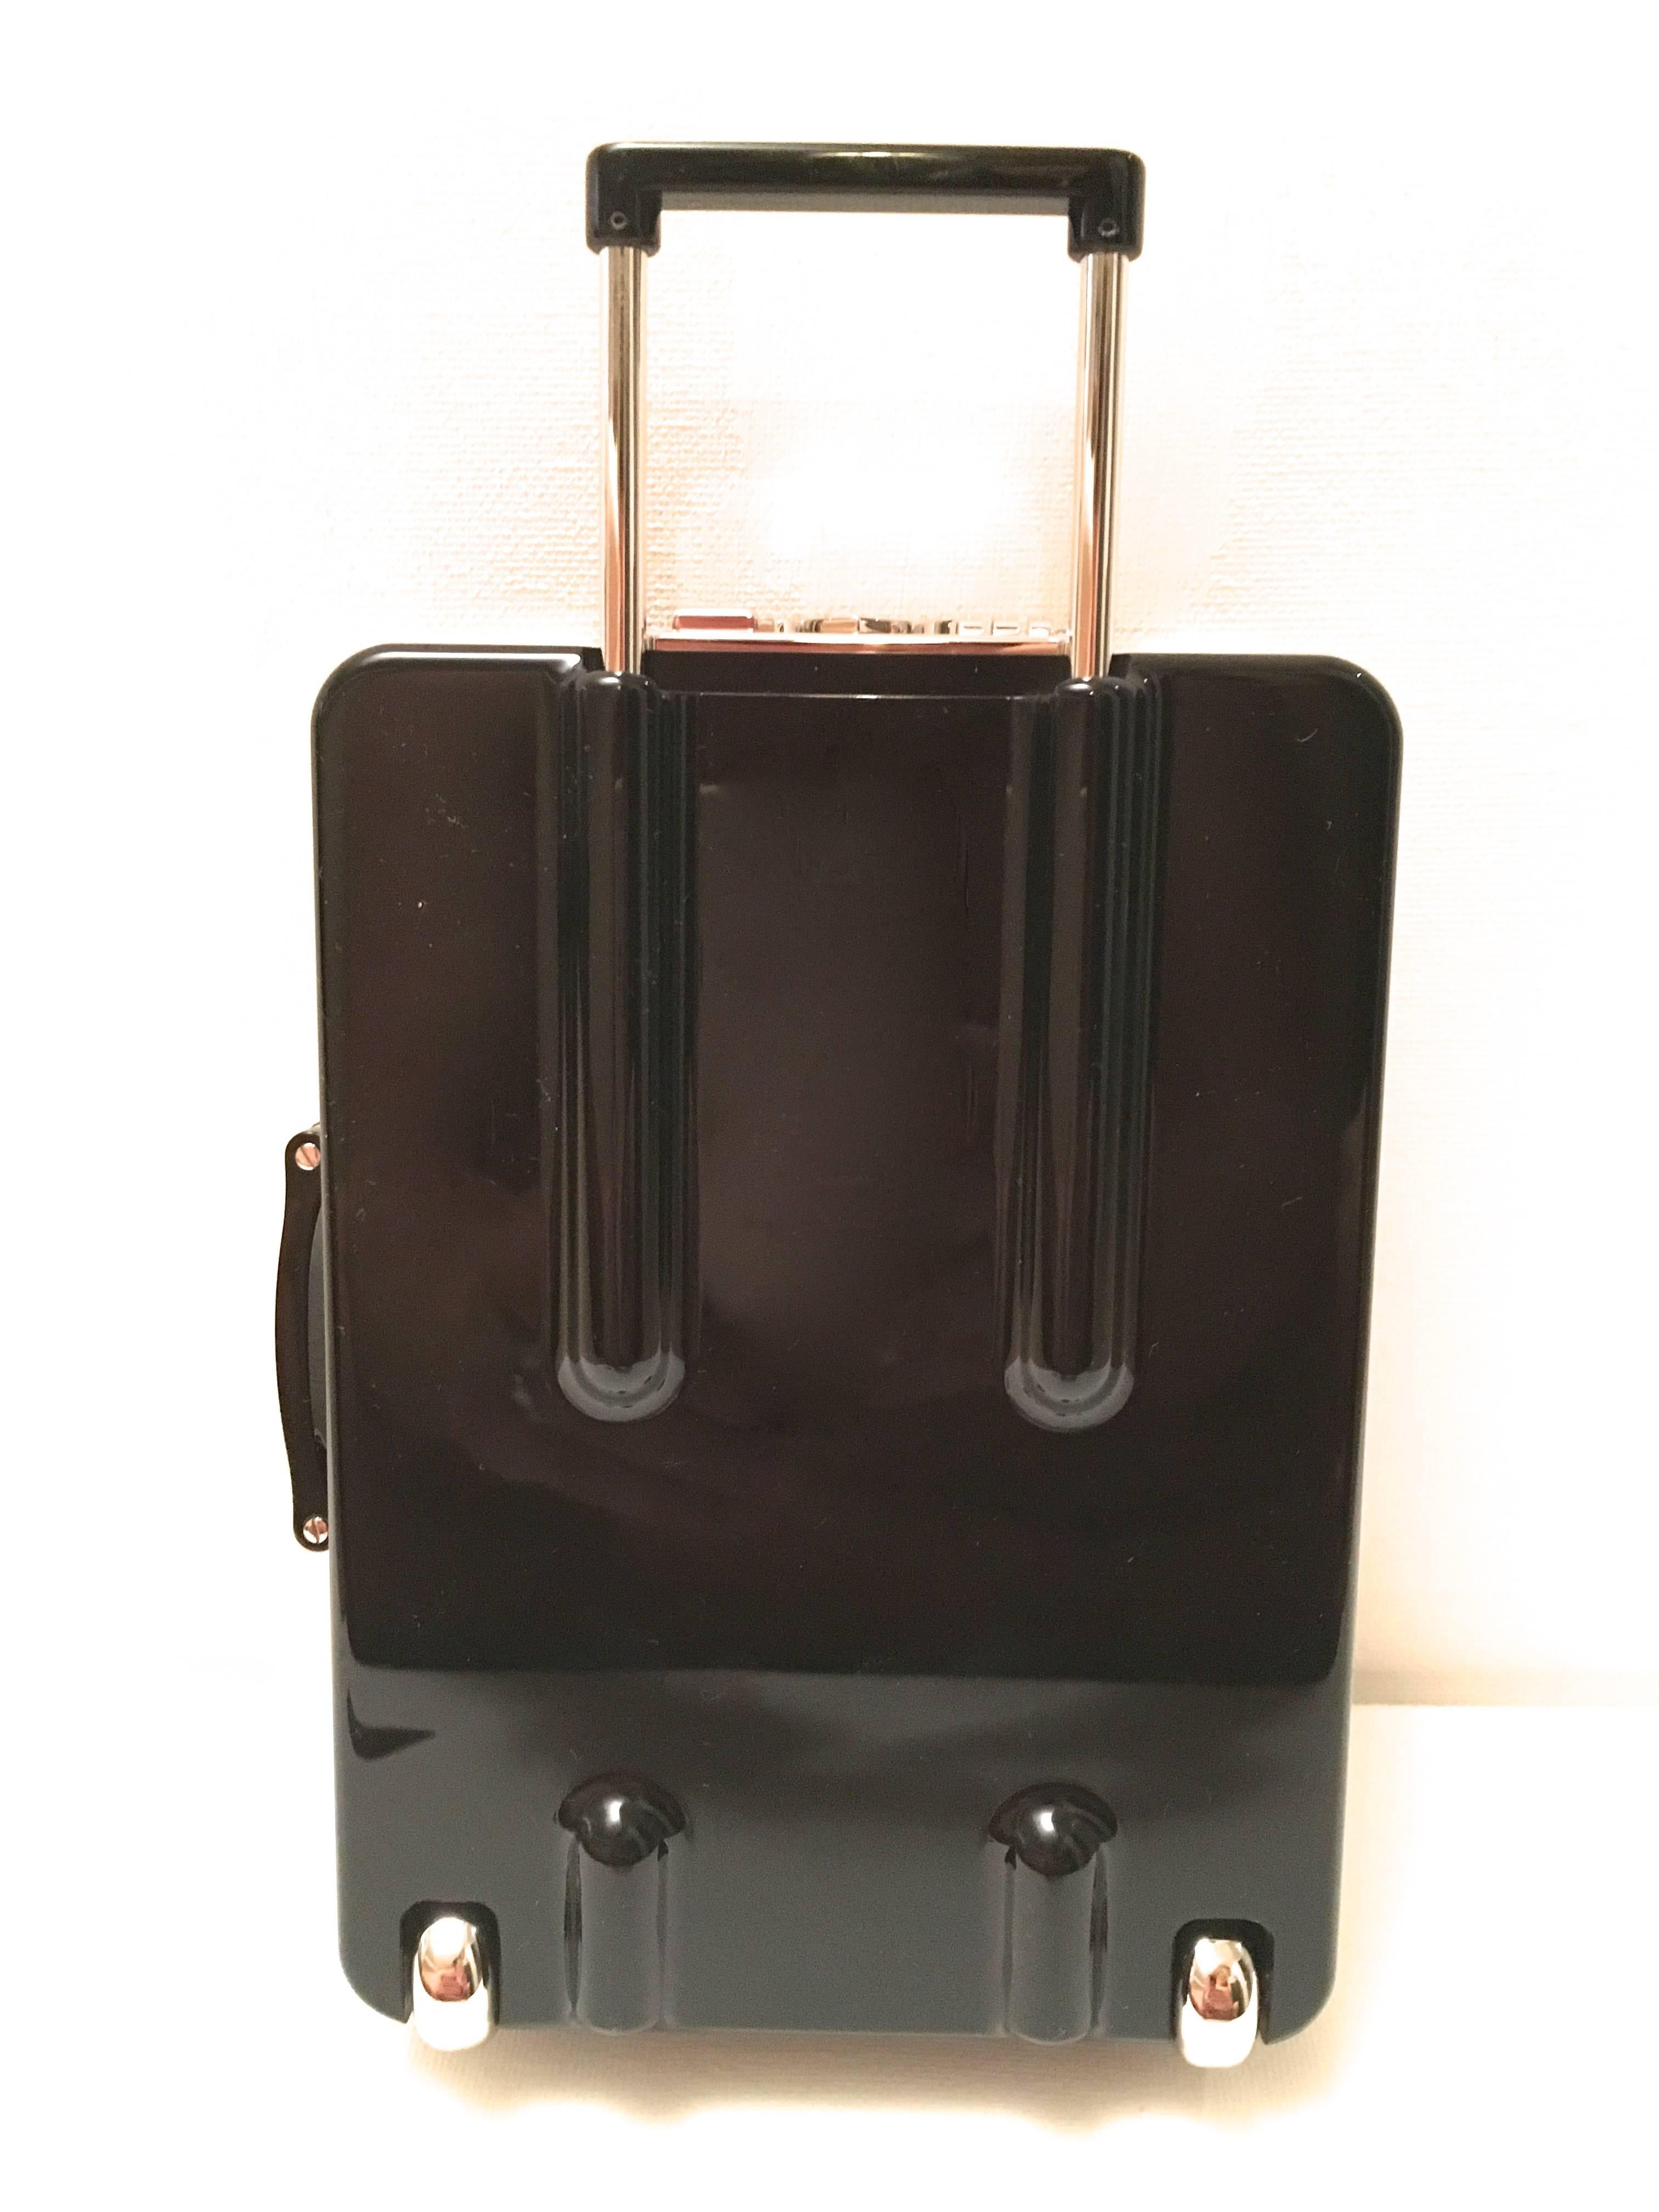 Rare Chanel Runway Purse - Carry-on Bag - Airline Collection 2016 In New Condition For Sale In Boca Raton, FL